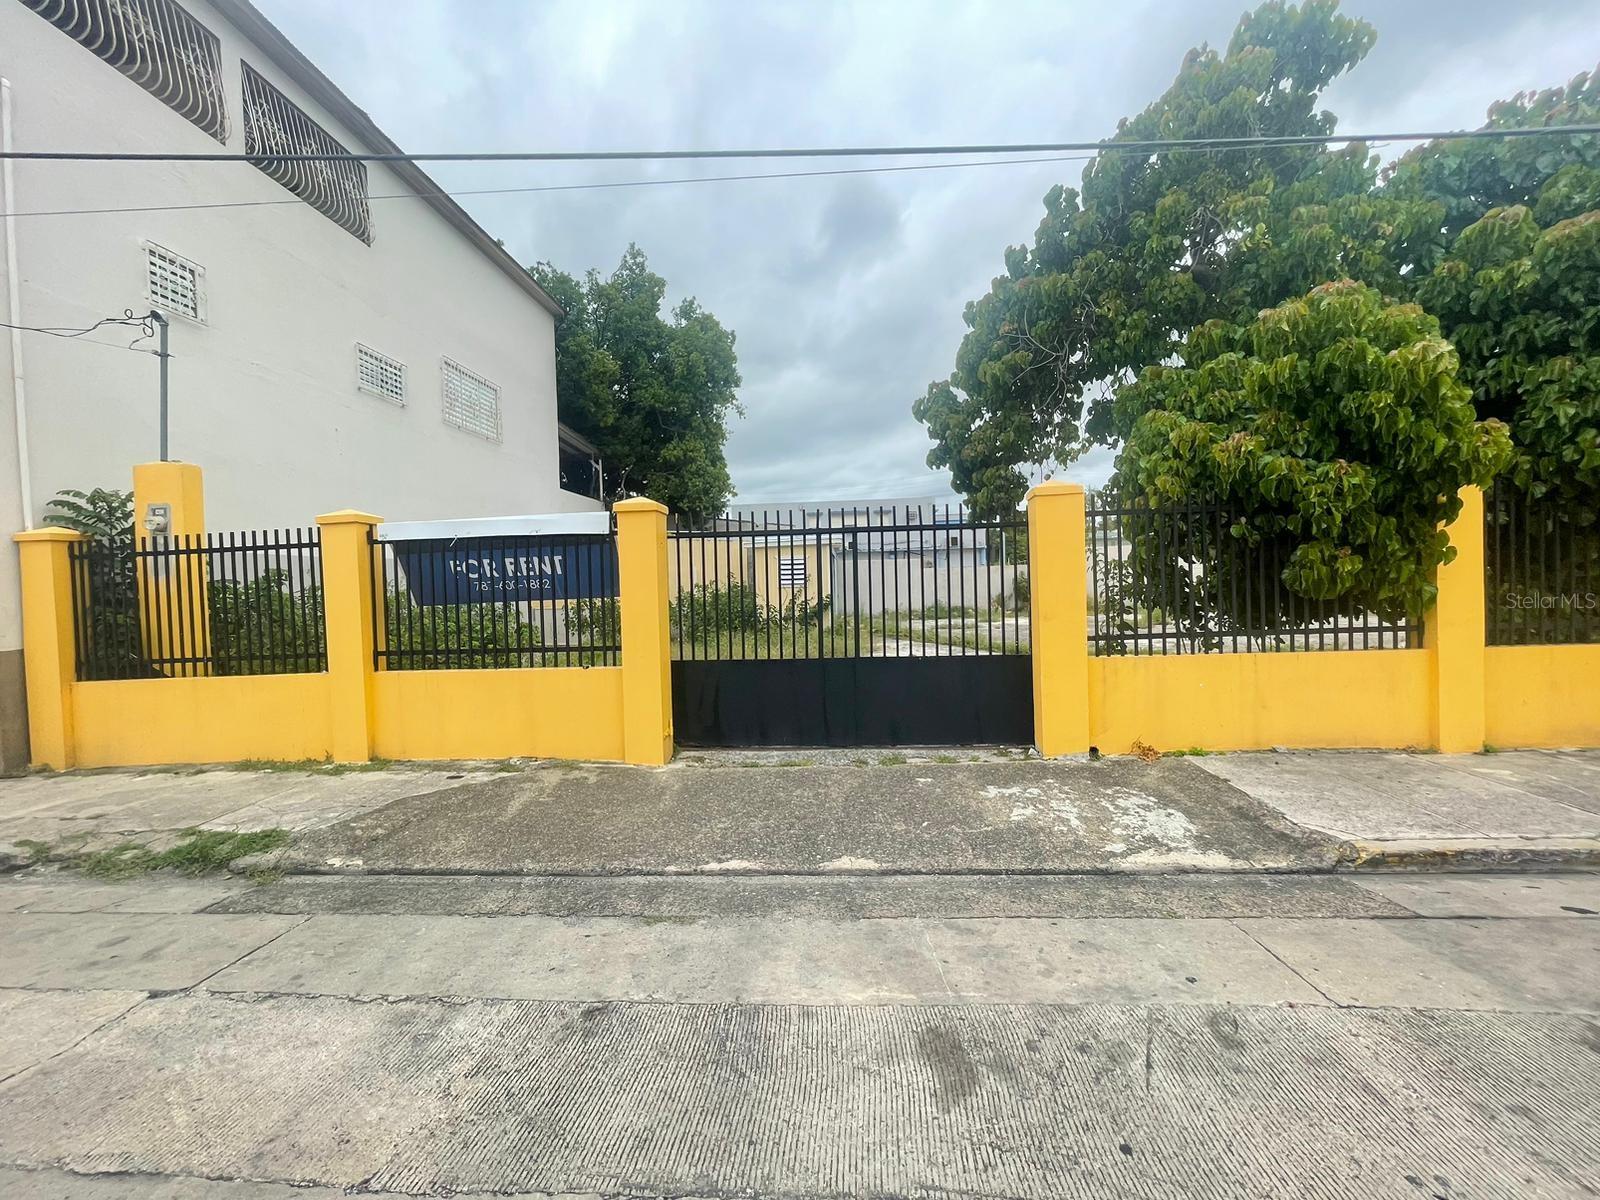 45 LEON STREET, Ponce, Puerto Rico 00730, ,Commercial Lease,For Rent,LEON STREET,PR9102984